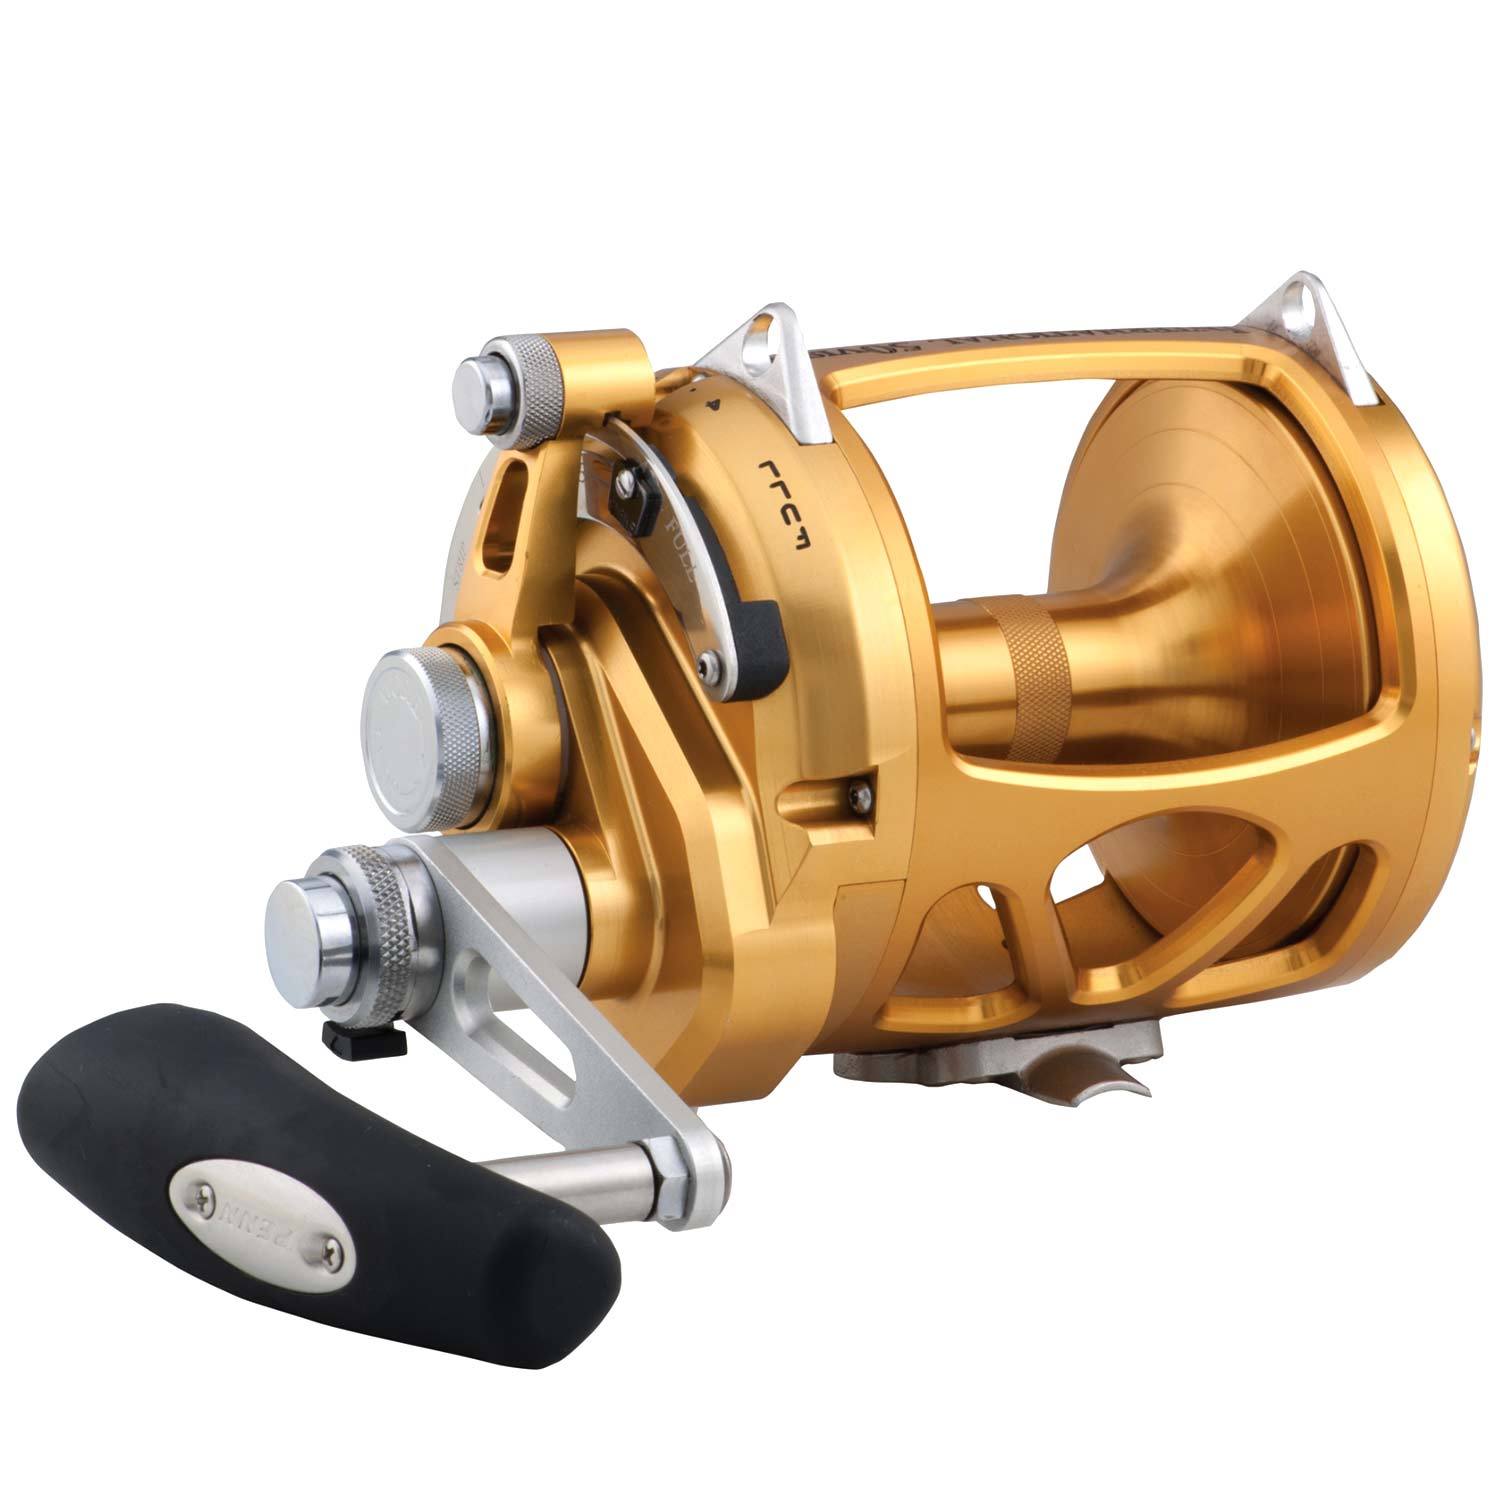 United States Conventional Fishing Reels for Saltwater Market Size